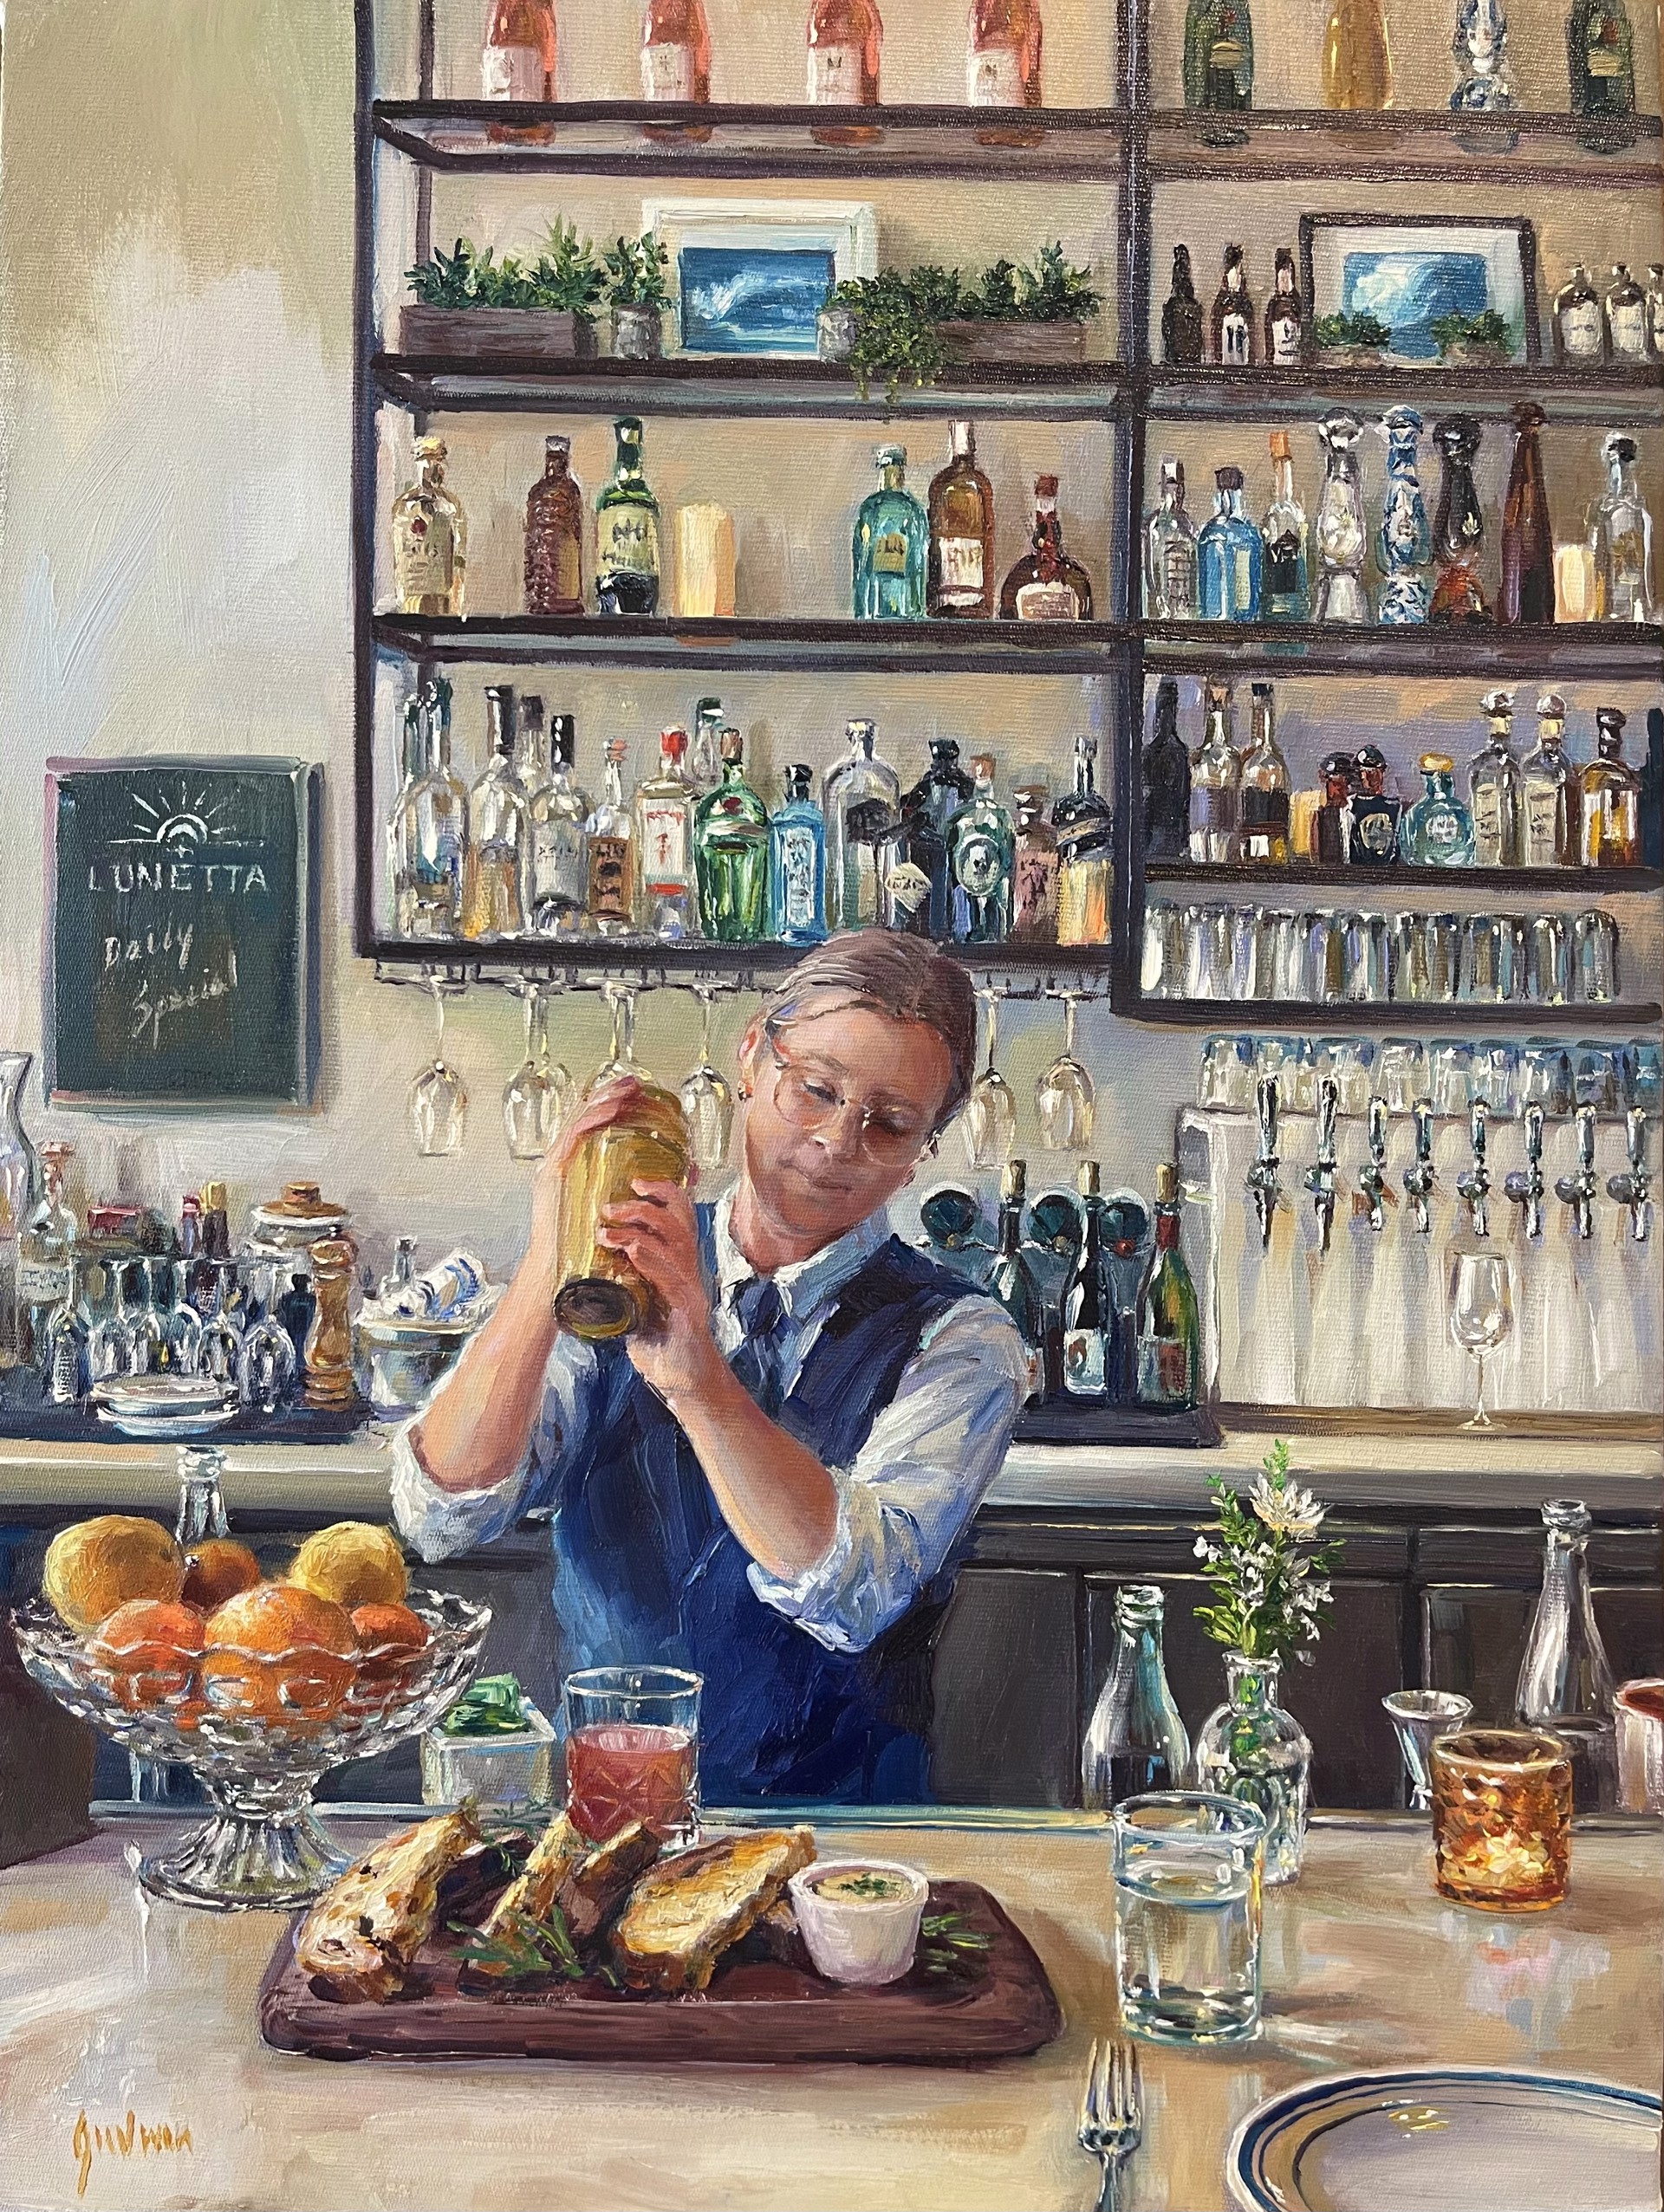 Emily, Bartender at Lunetta by Lindsay Goodwin